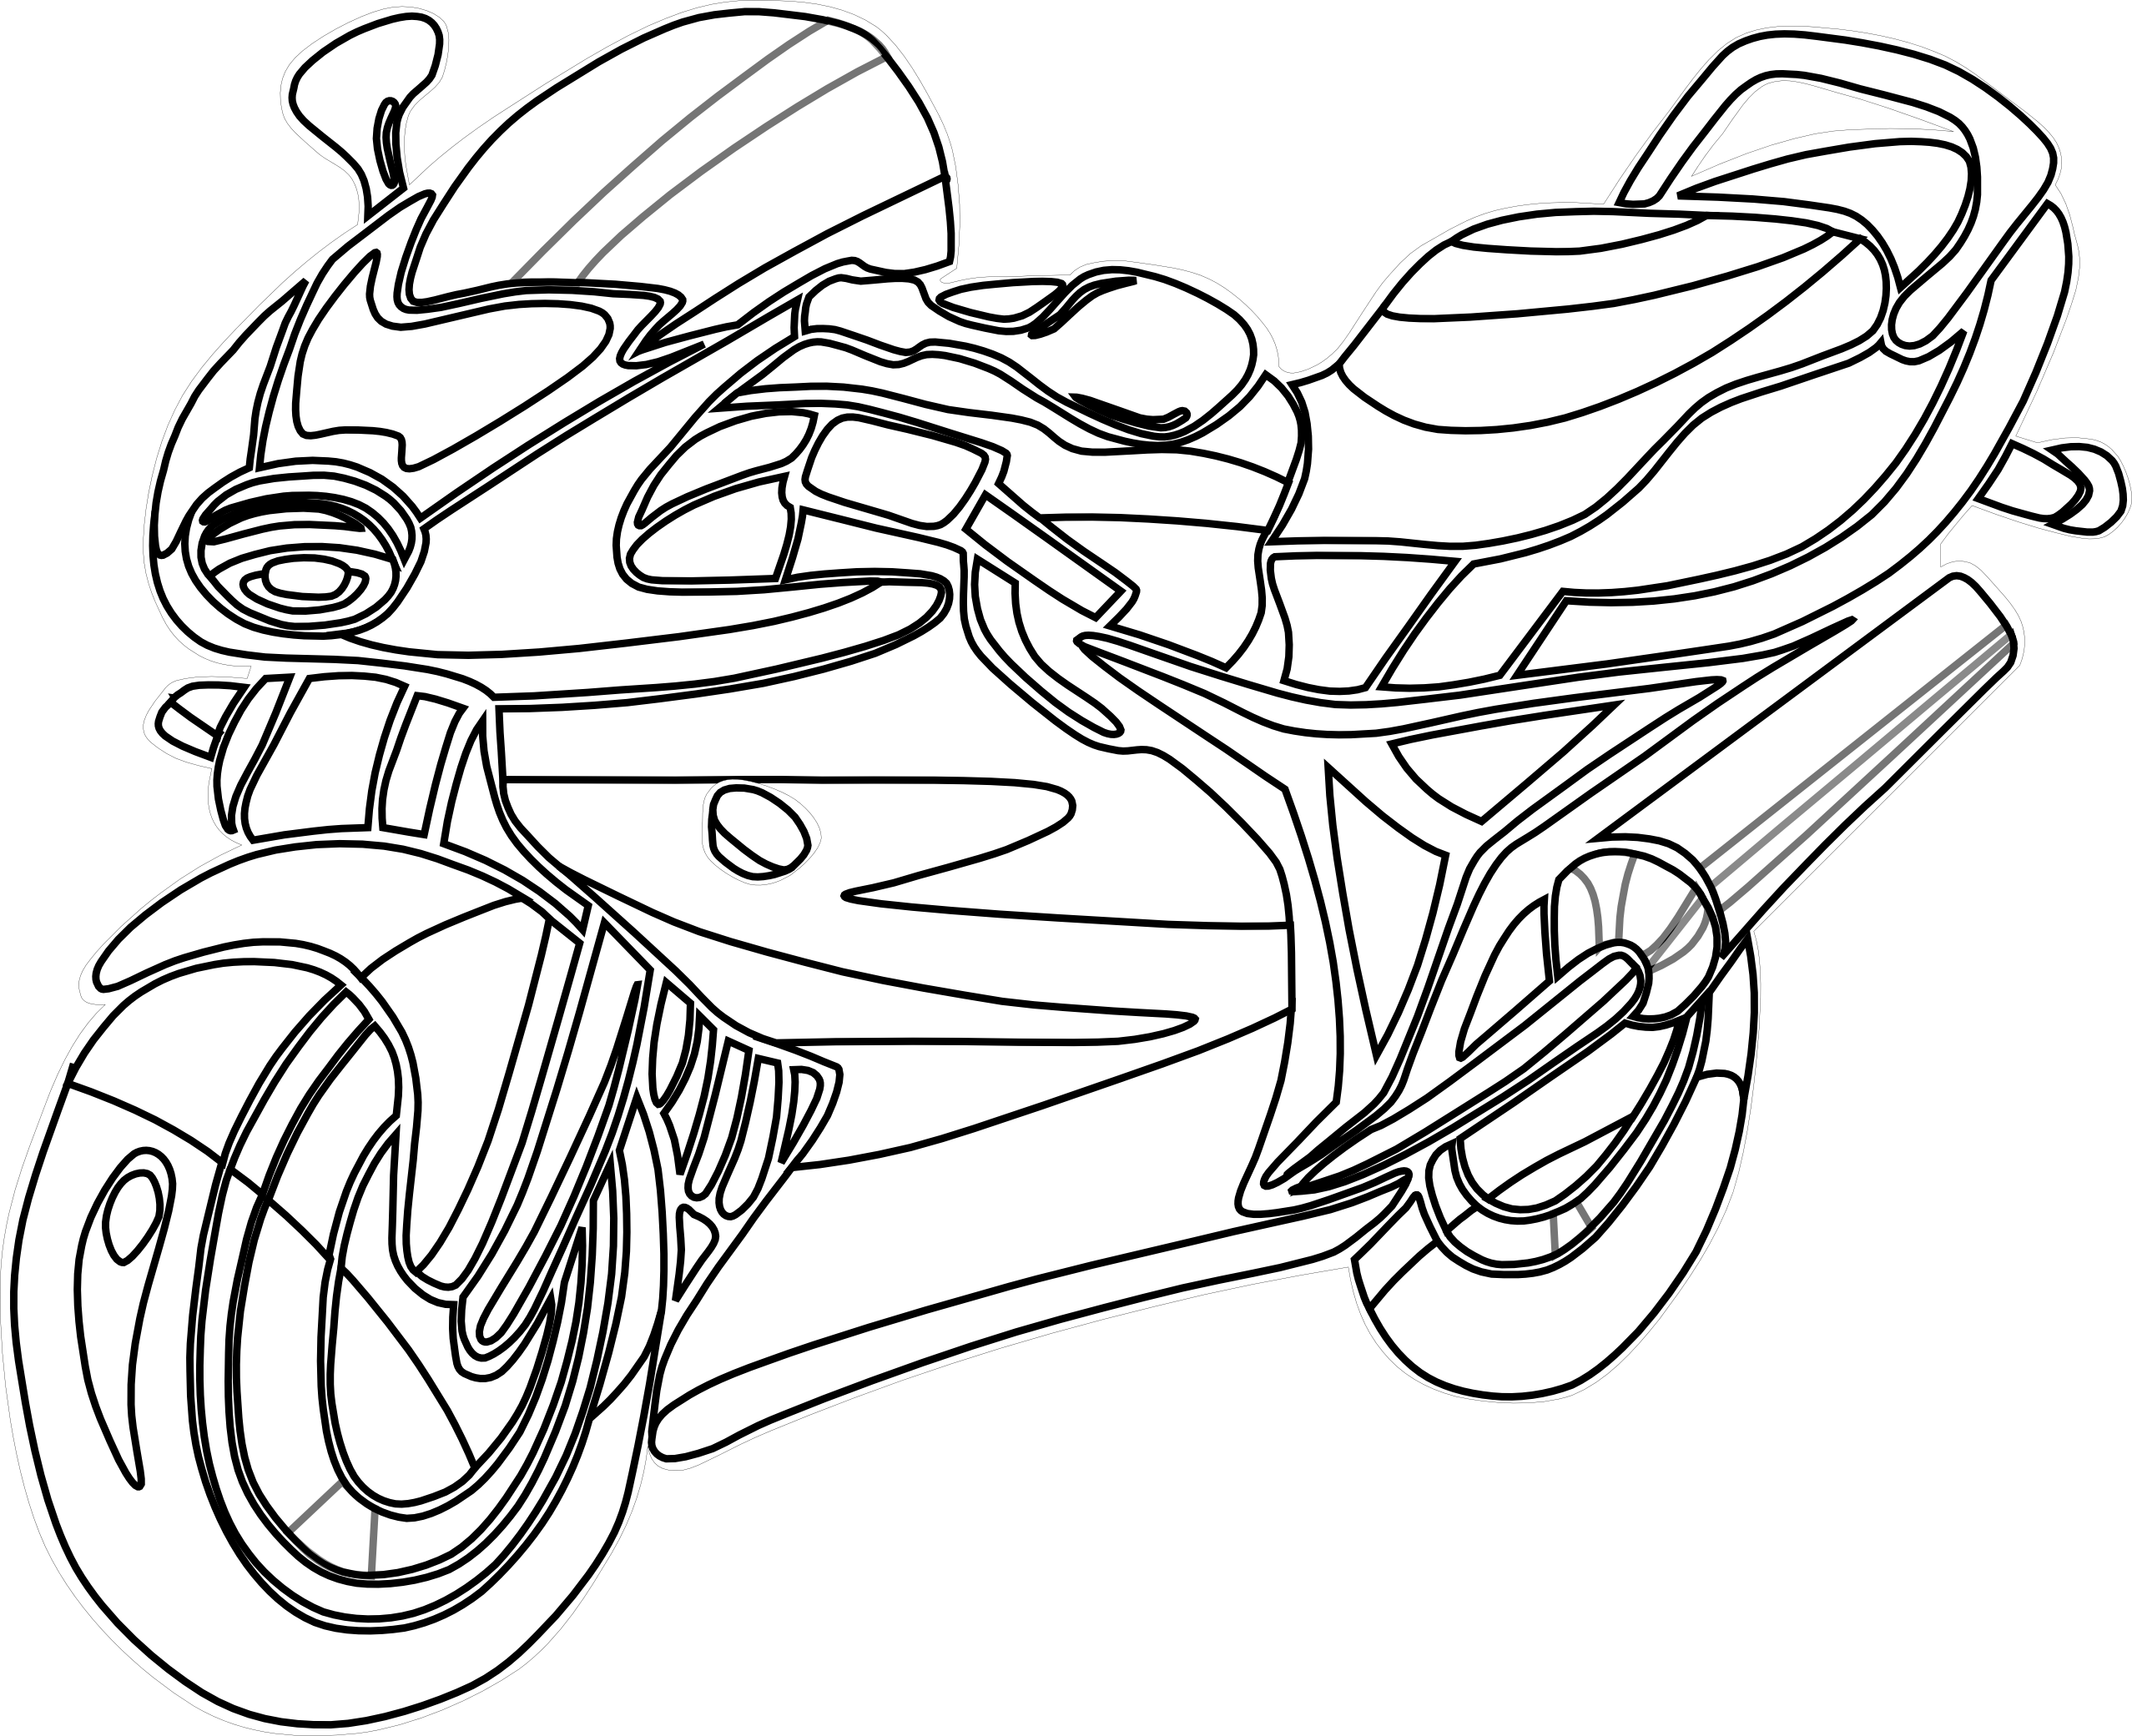 Free Motorcycle Motorcycle Pictures Graphics 2 Clipart